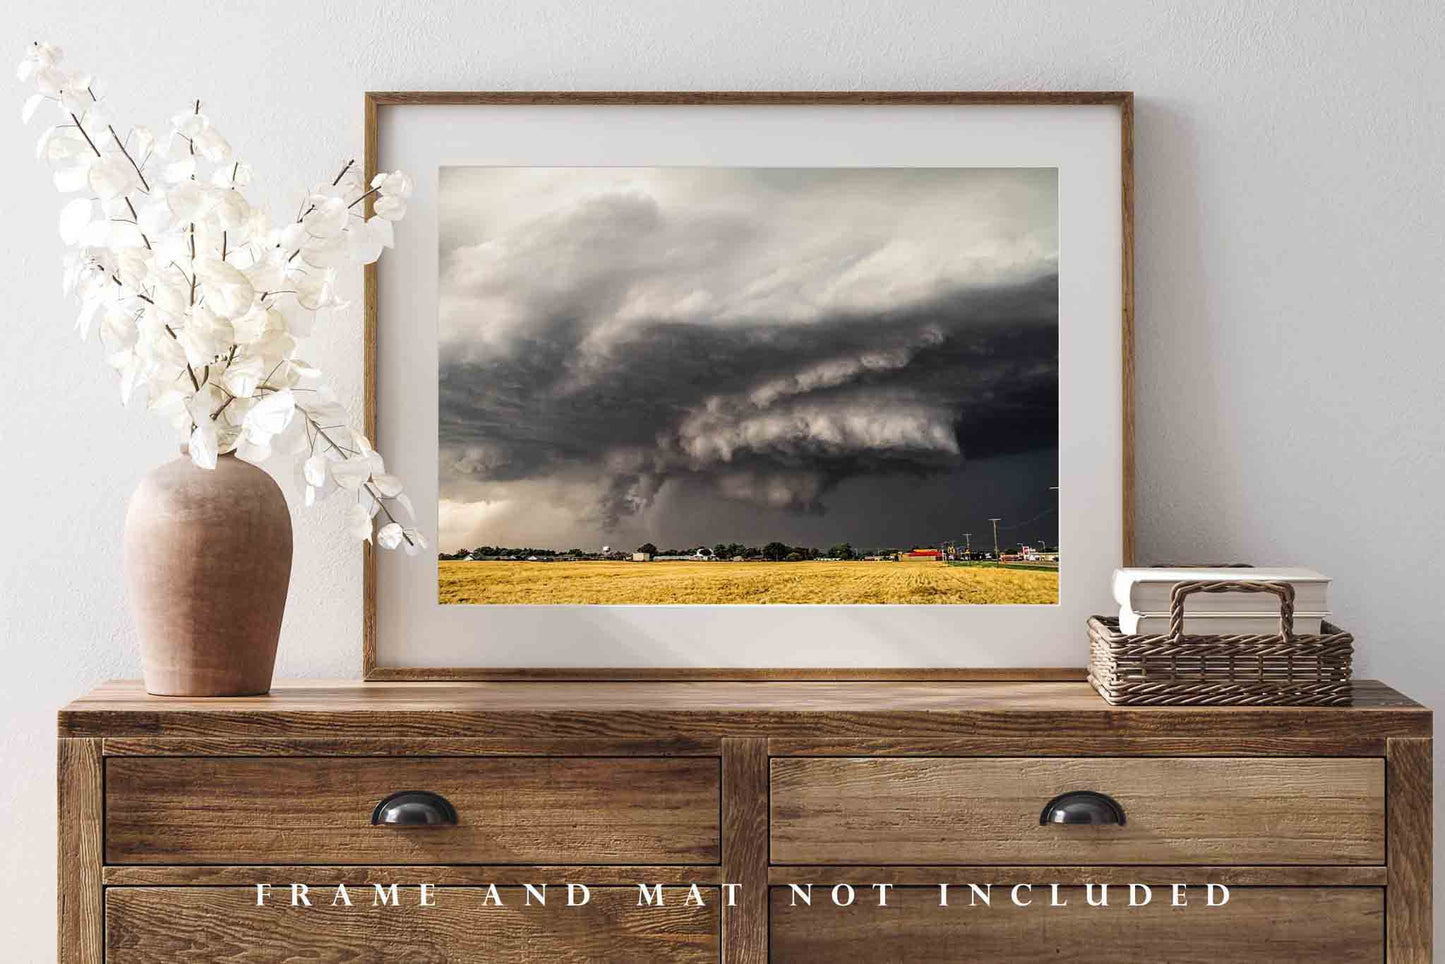 Storm Photography Print - Picture of Supercell Thunderstorm with Wall Cloud Over Small Town in Oklahoma - Weather Photo Artwork Decor